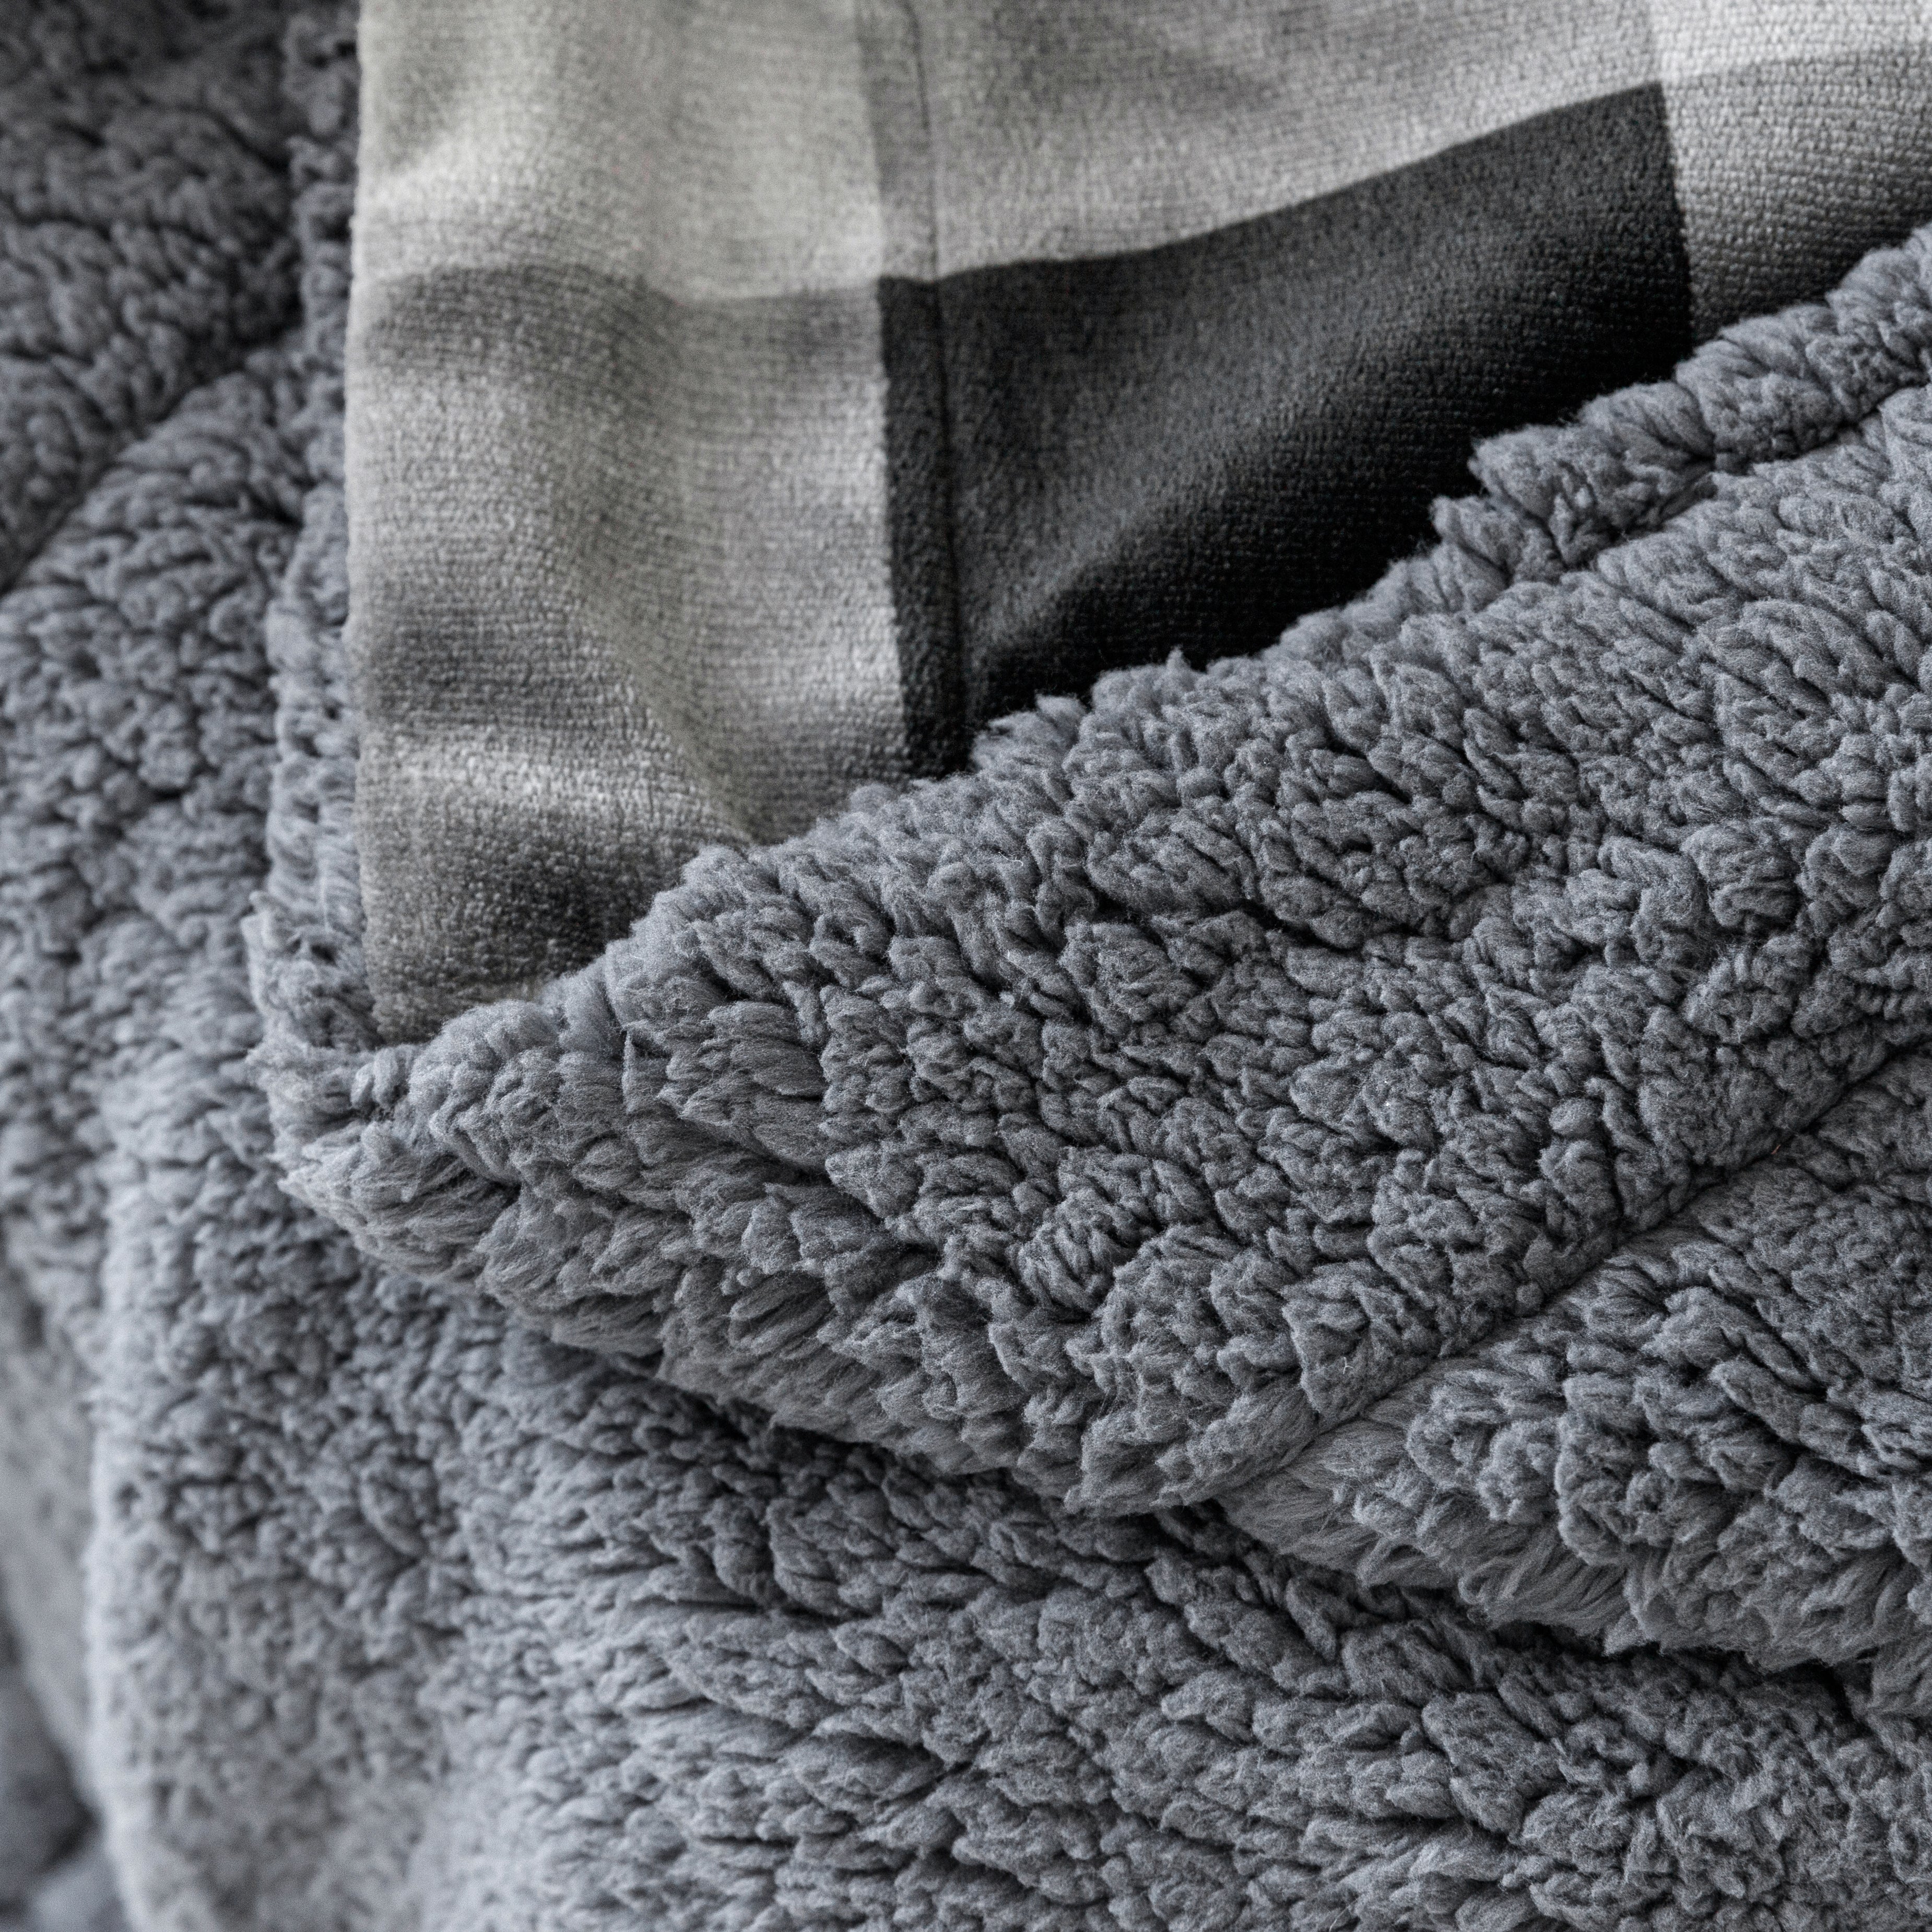 Velvet to Sherpa Throw Blanket 50 x 60 inches Charcoal Buffalo Check to Grey